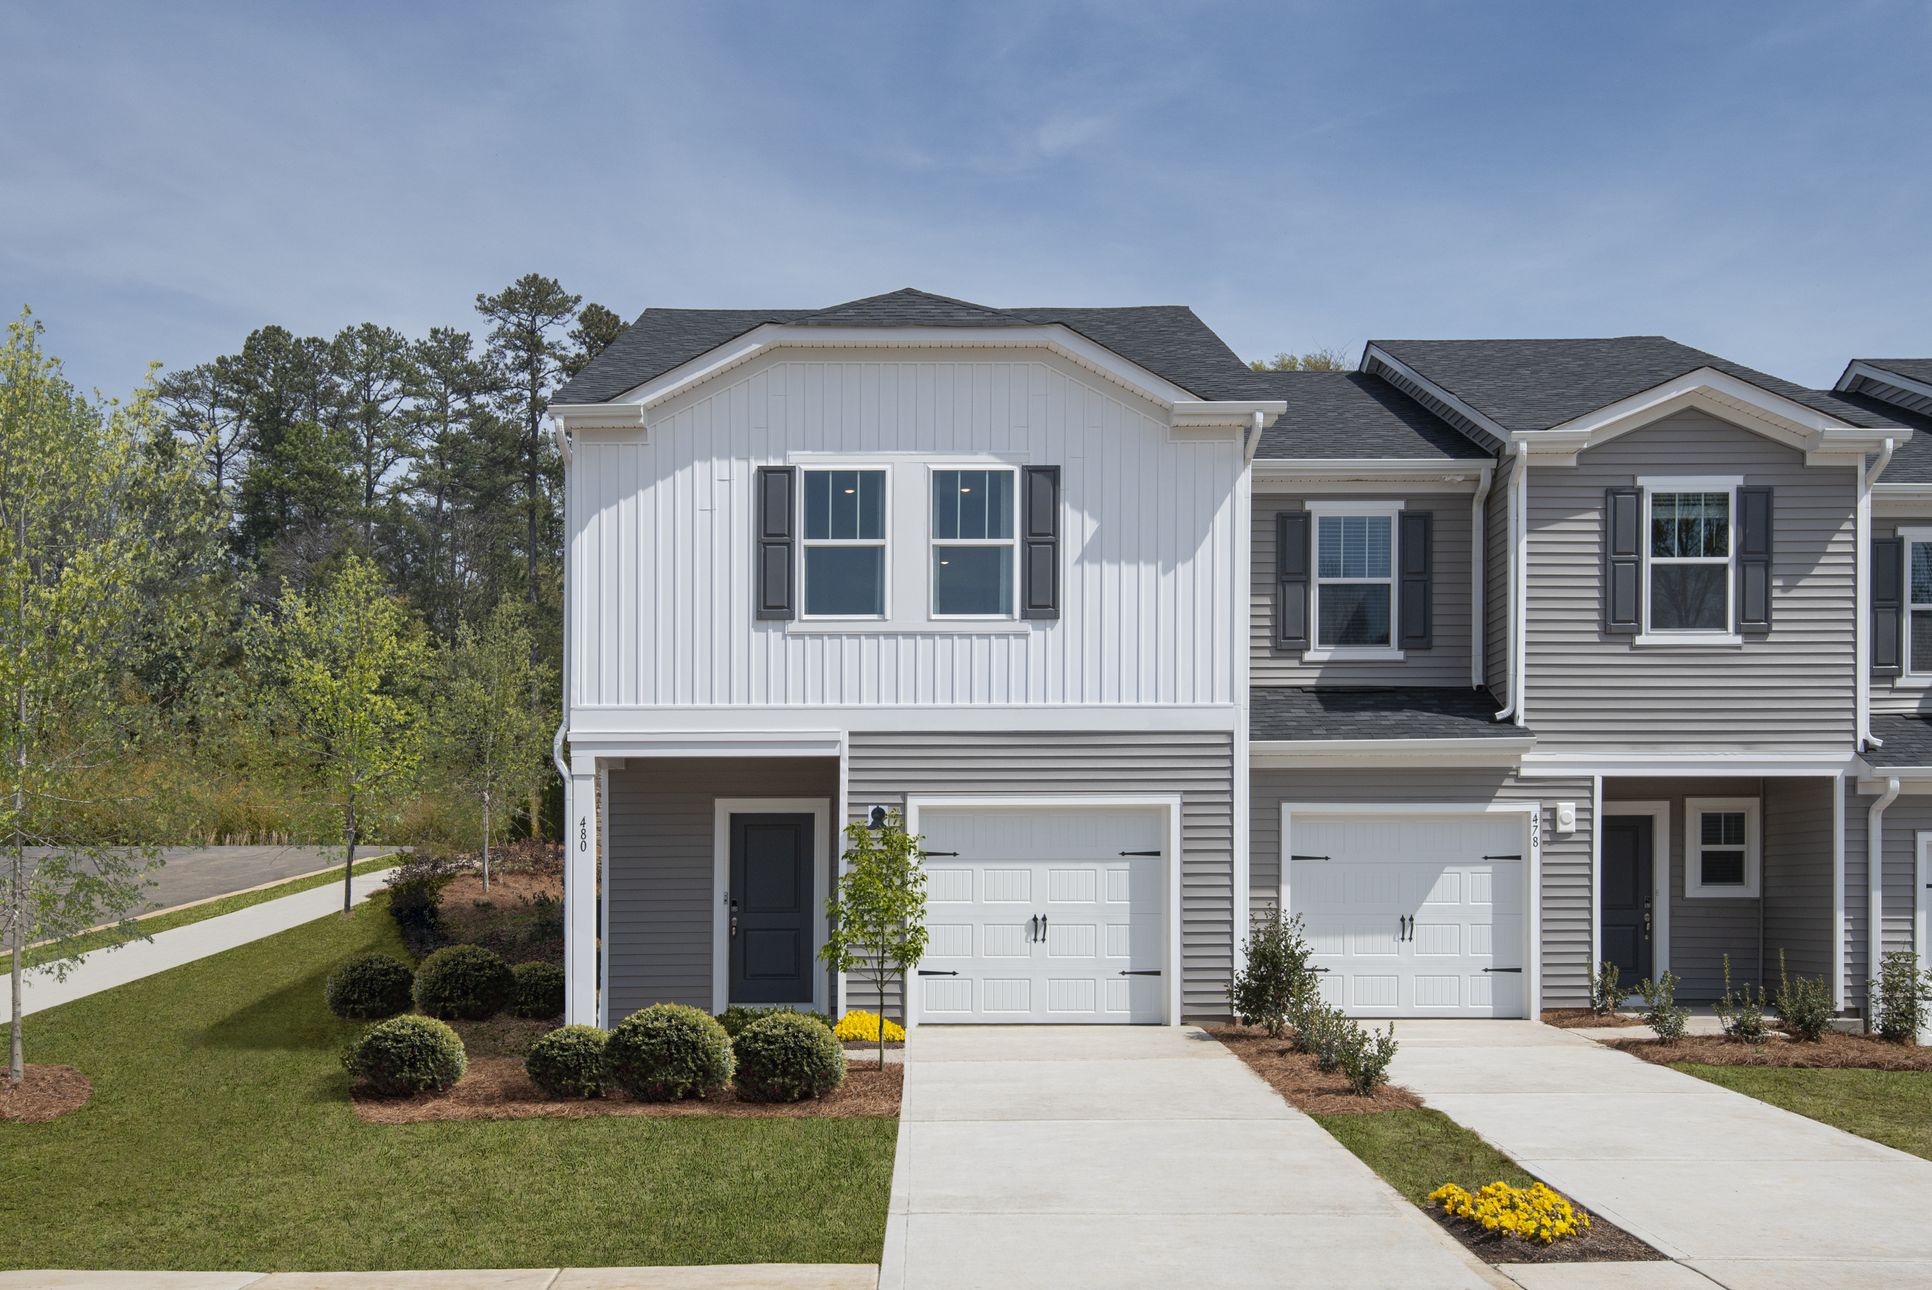 Welcome to the Amber floorplan modeled at Ashe Downs.